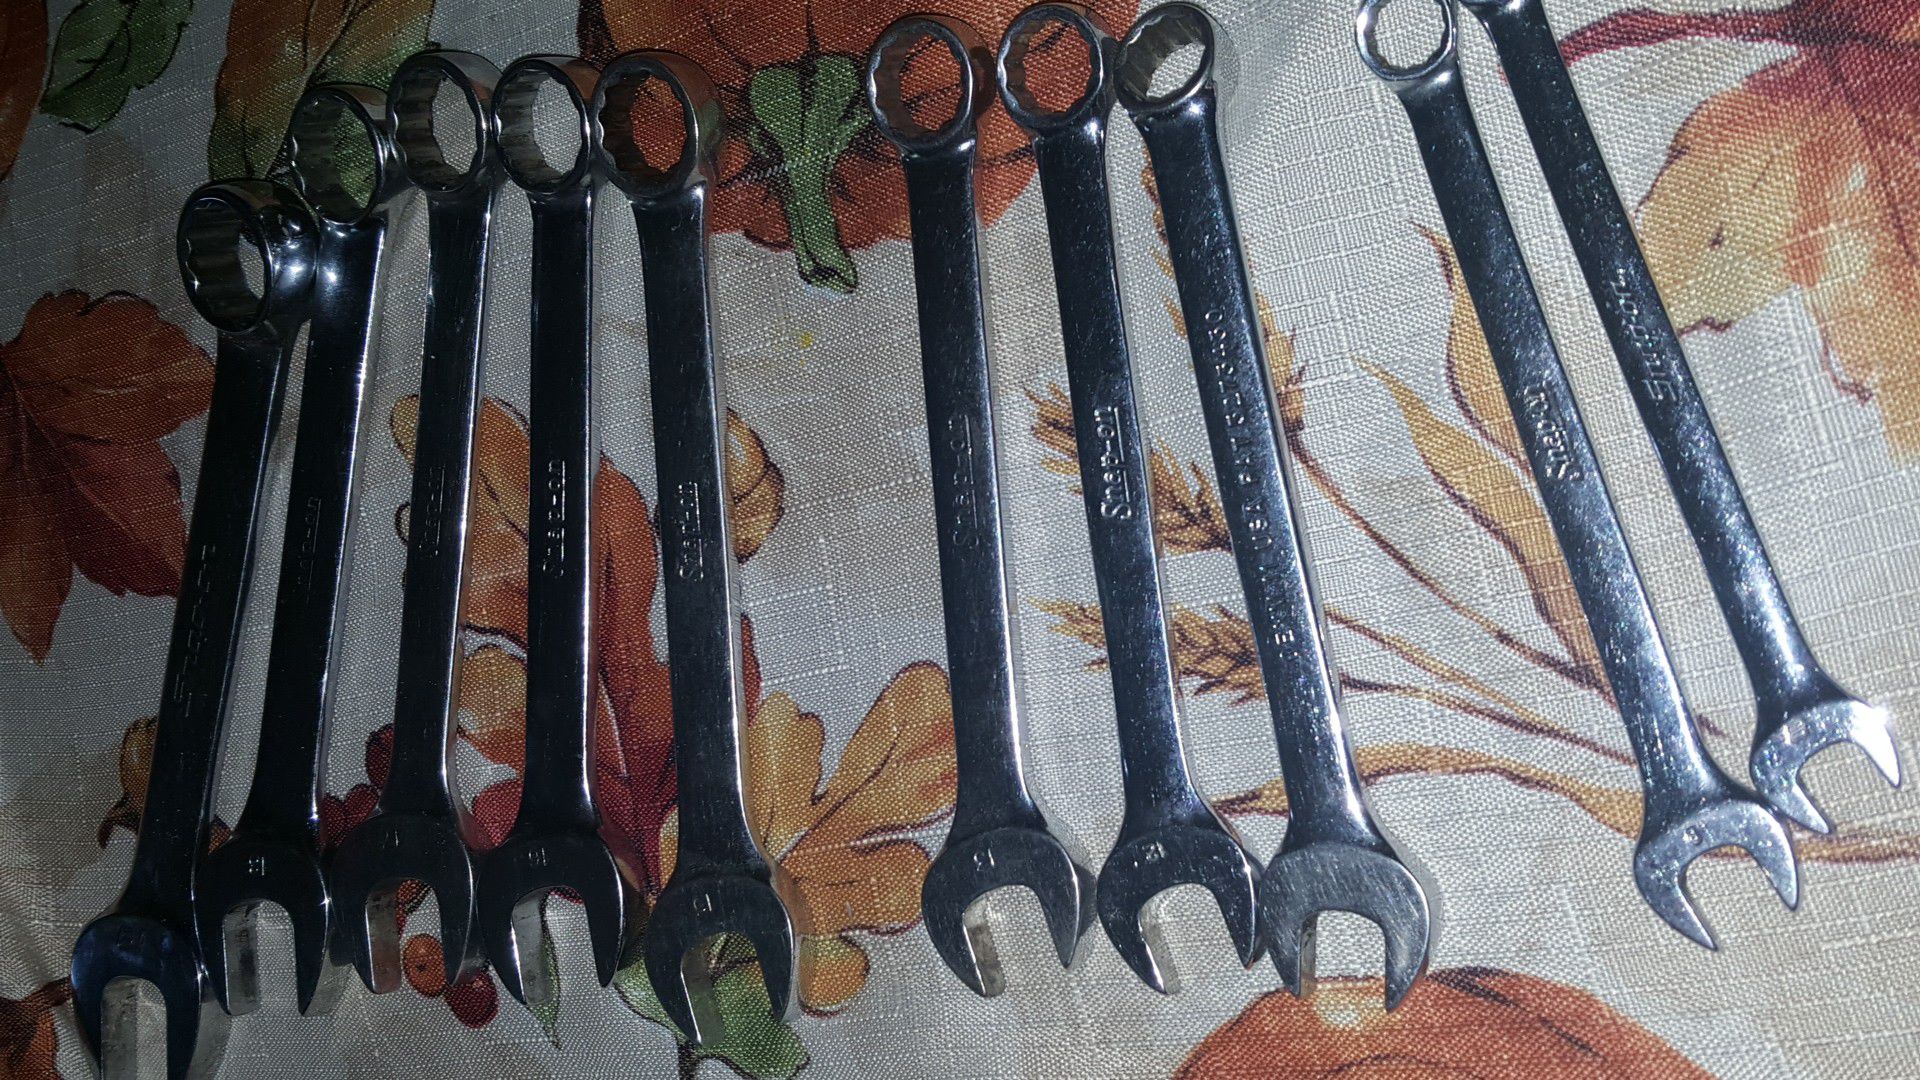 Snap on wrench tool set